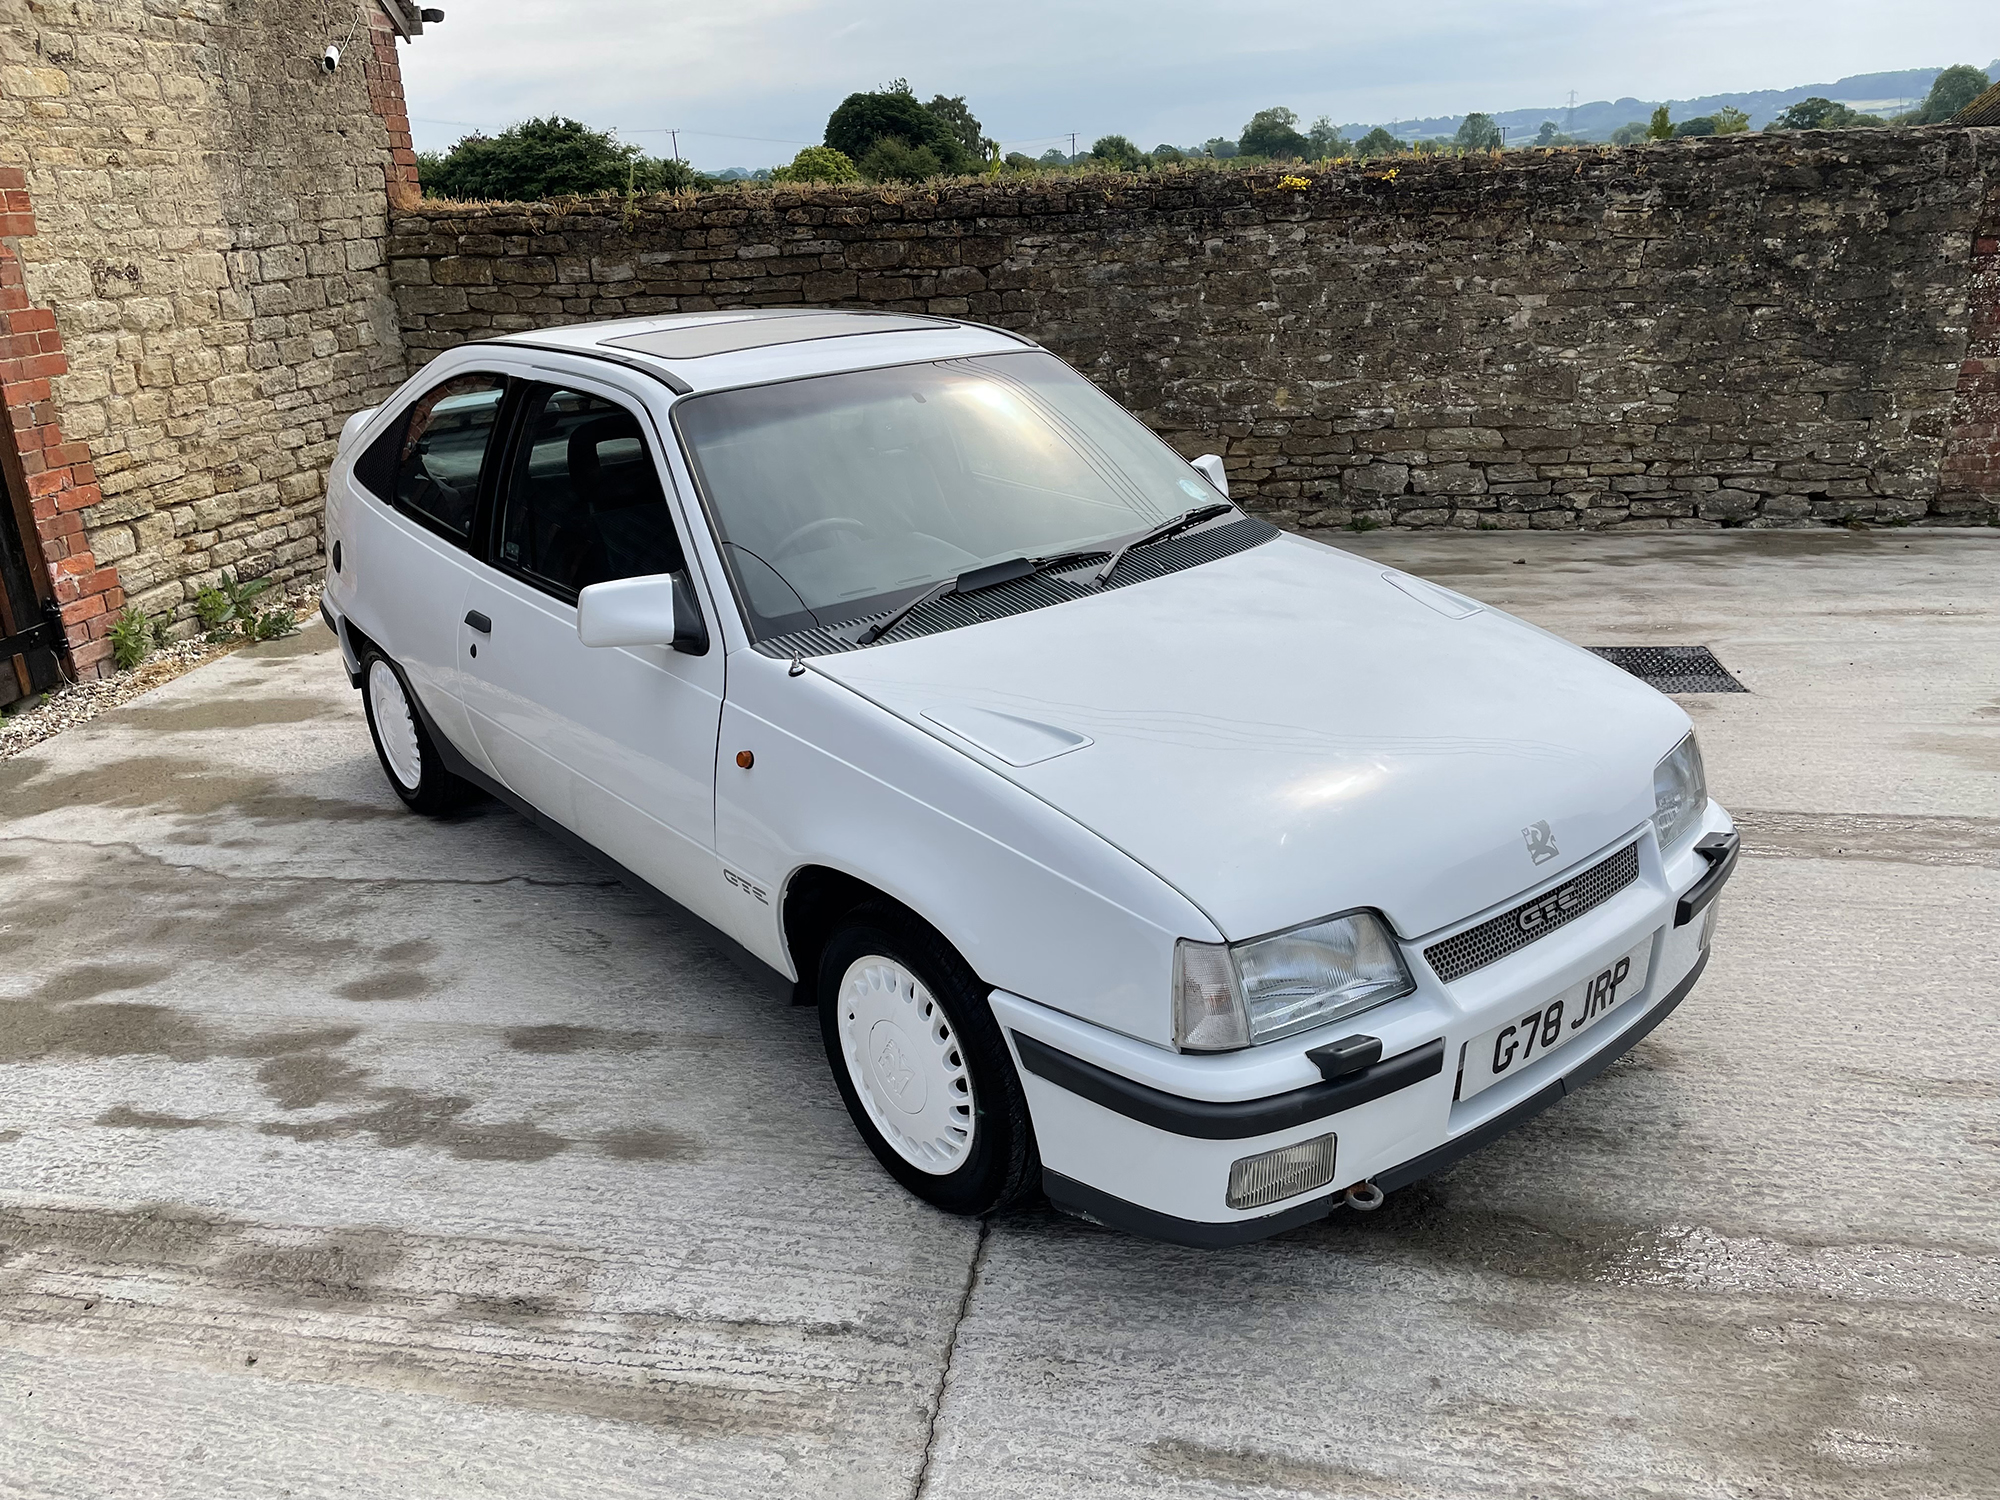 1989 Vauxhall Astra GTE 8V Reg. no. G78 JRP Chassis no. W0L000043LE112697 - Image 3 of 18